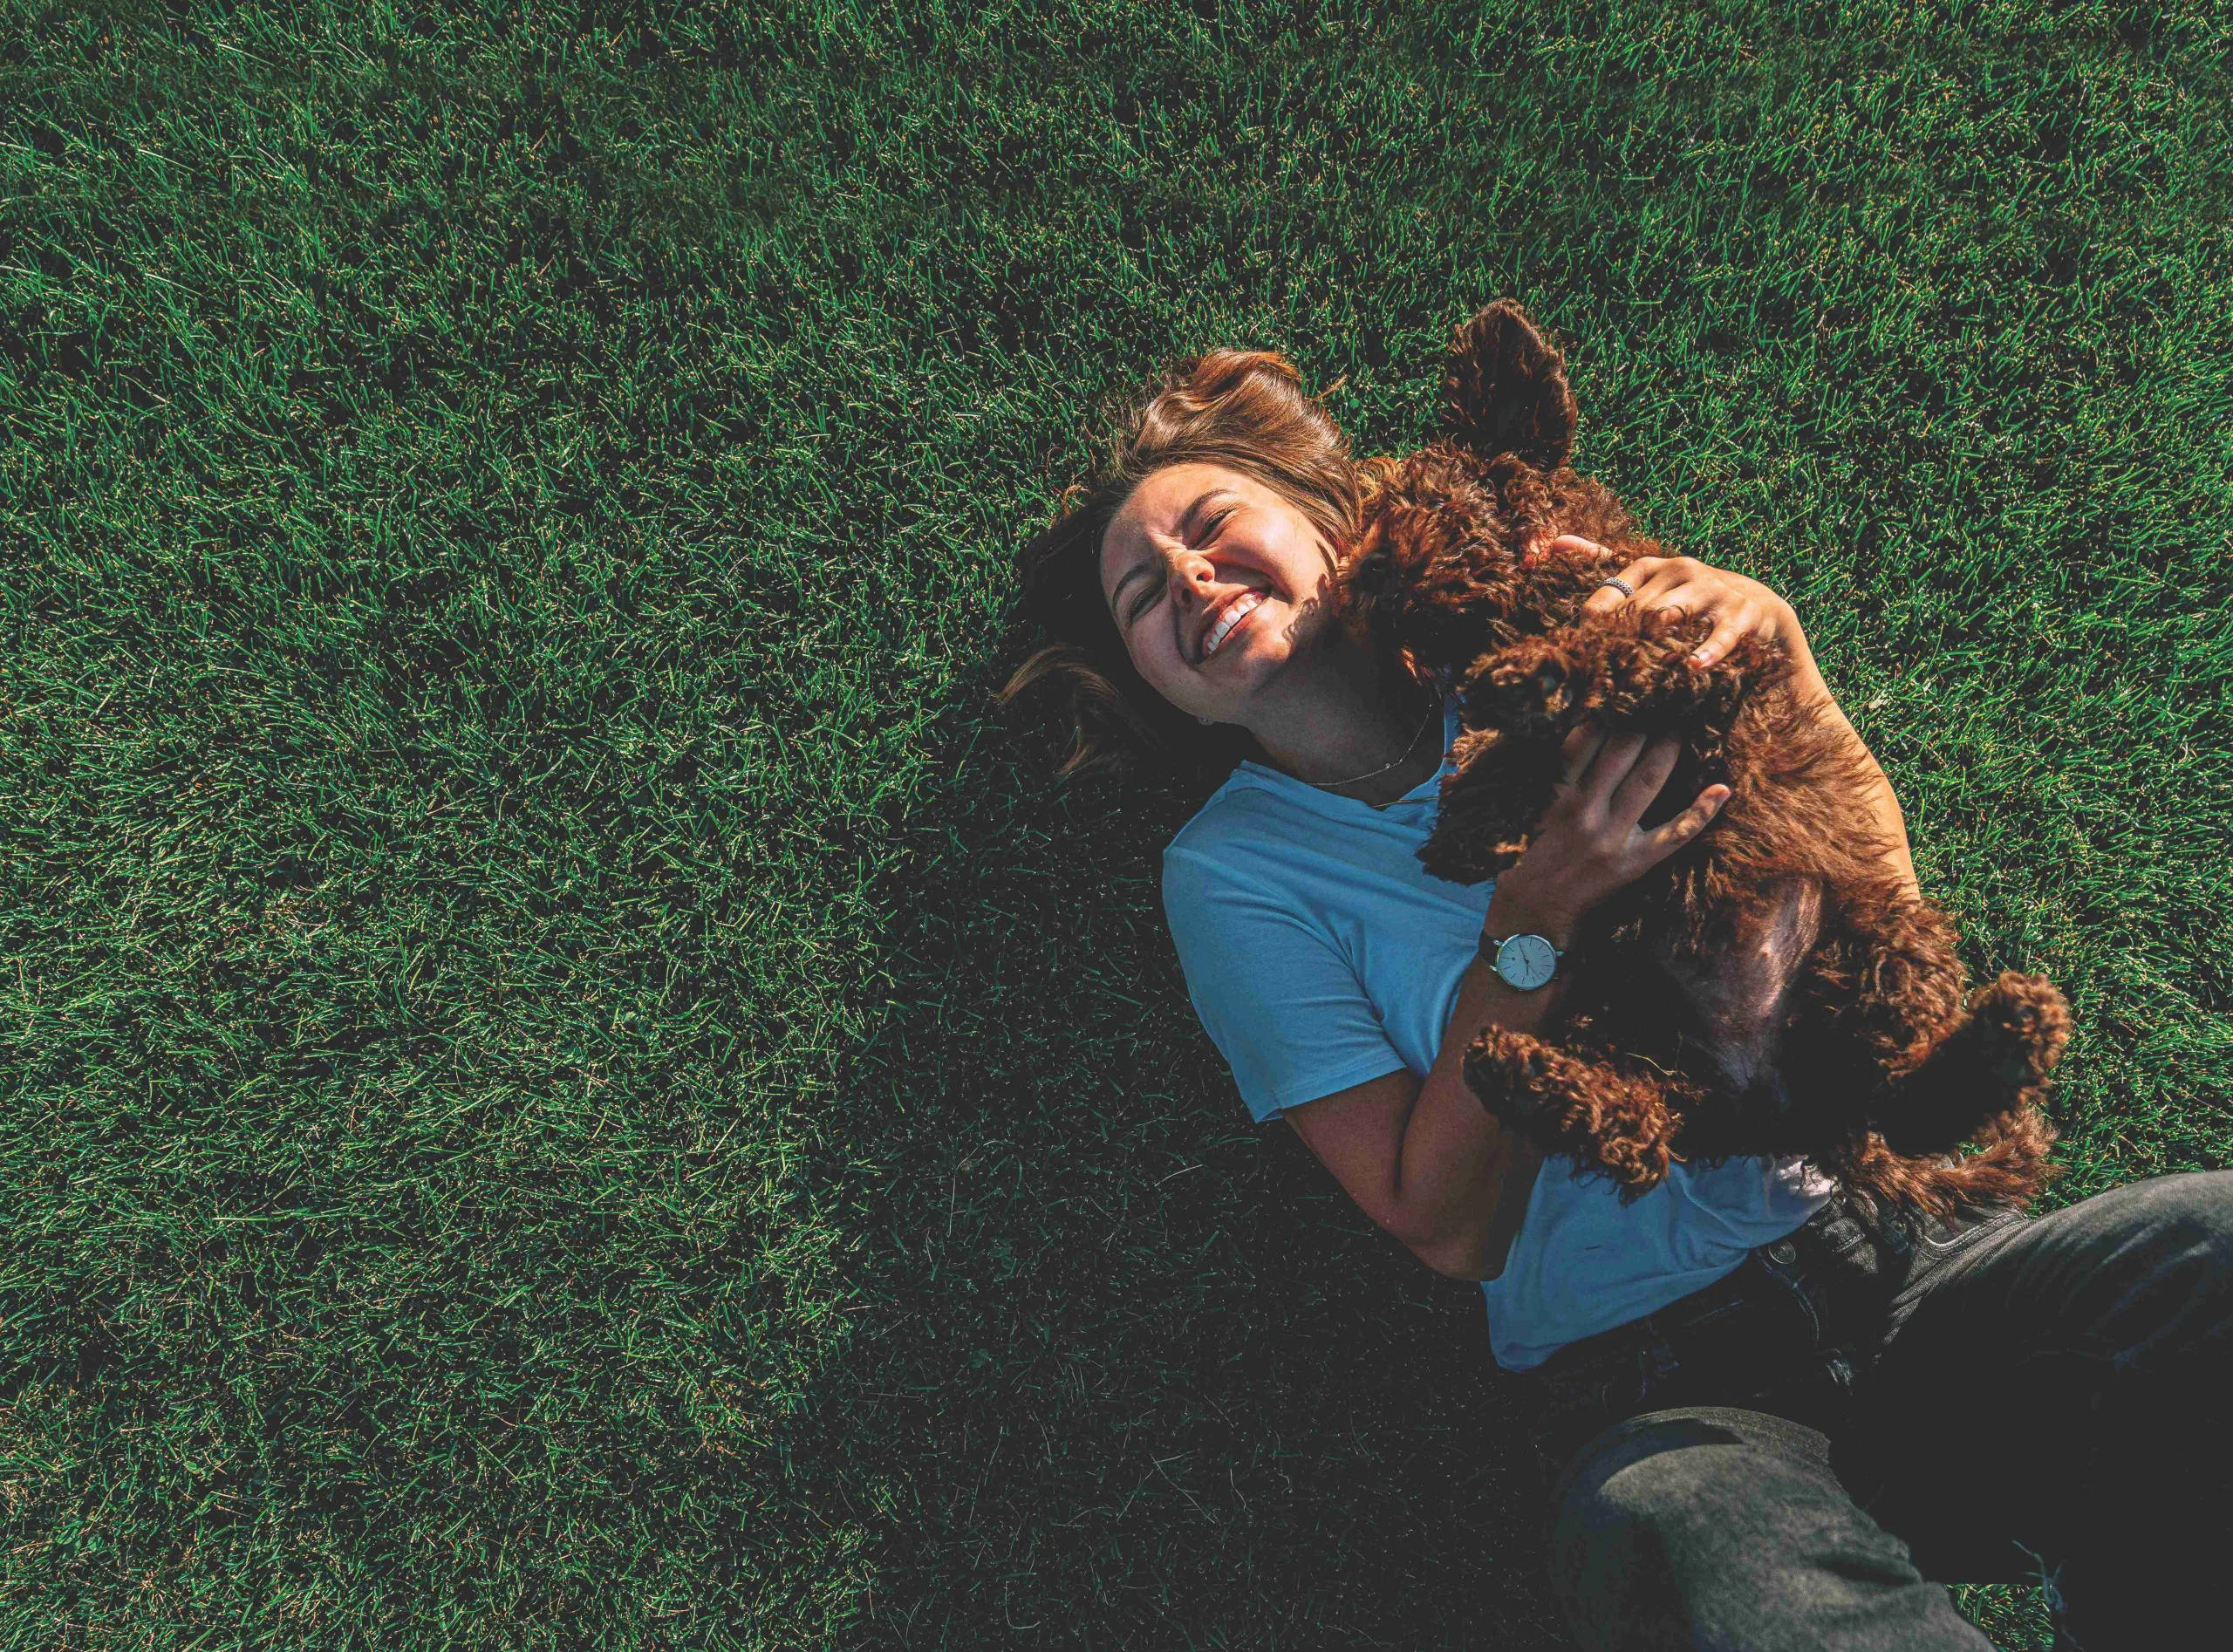 Woman lying in grass with her chestnut-colored poodle on her chest licking her face. The woman is smiling and holding her dog. She is wearing a watch on her right arm and wearing a blue t-shirt and black denim jeans.